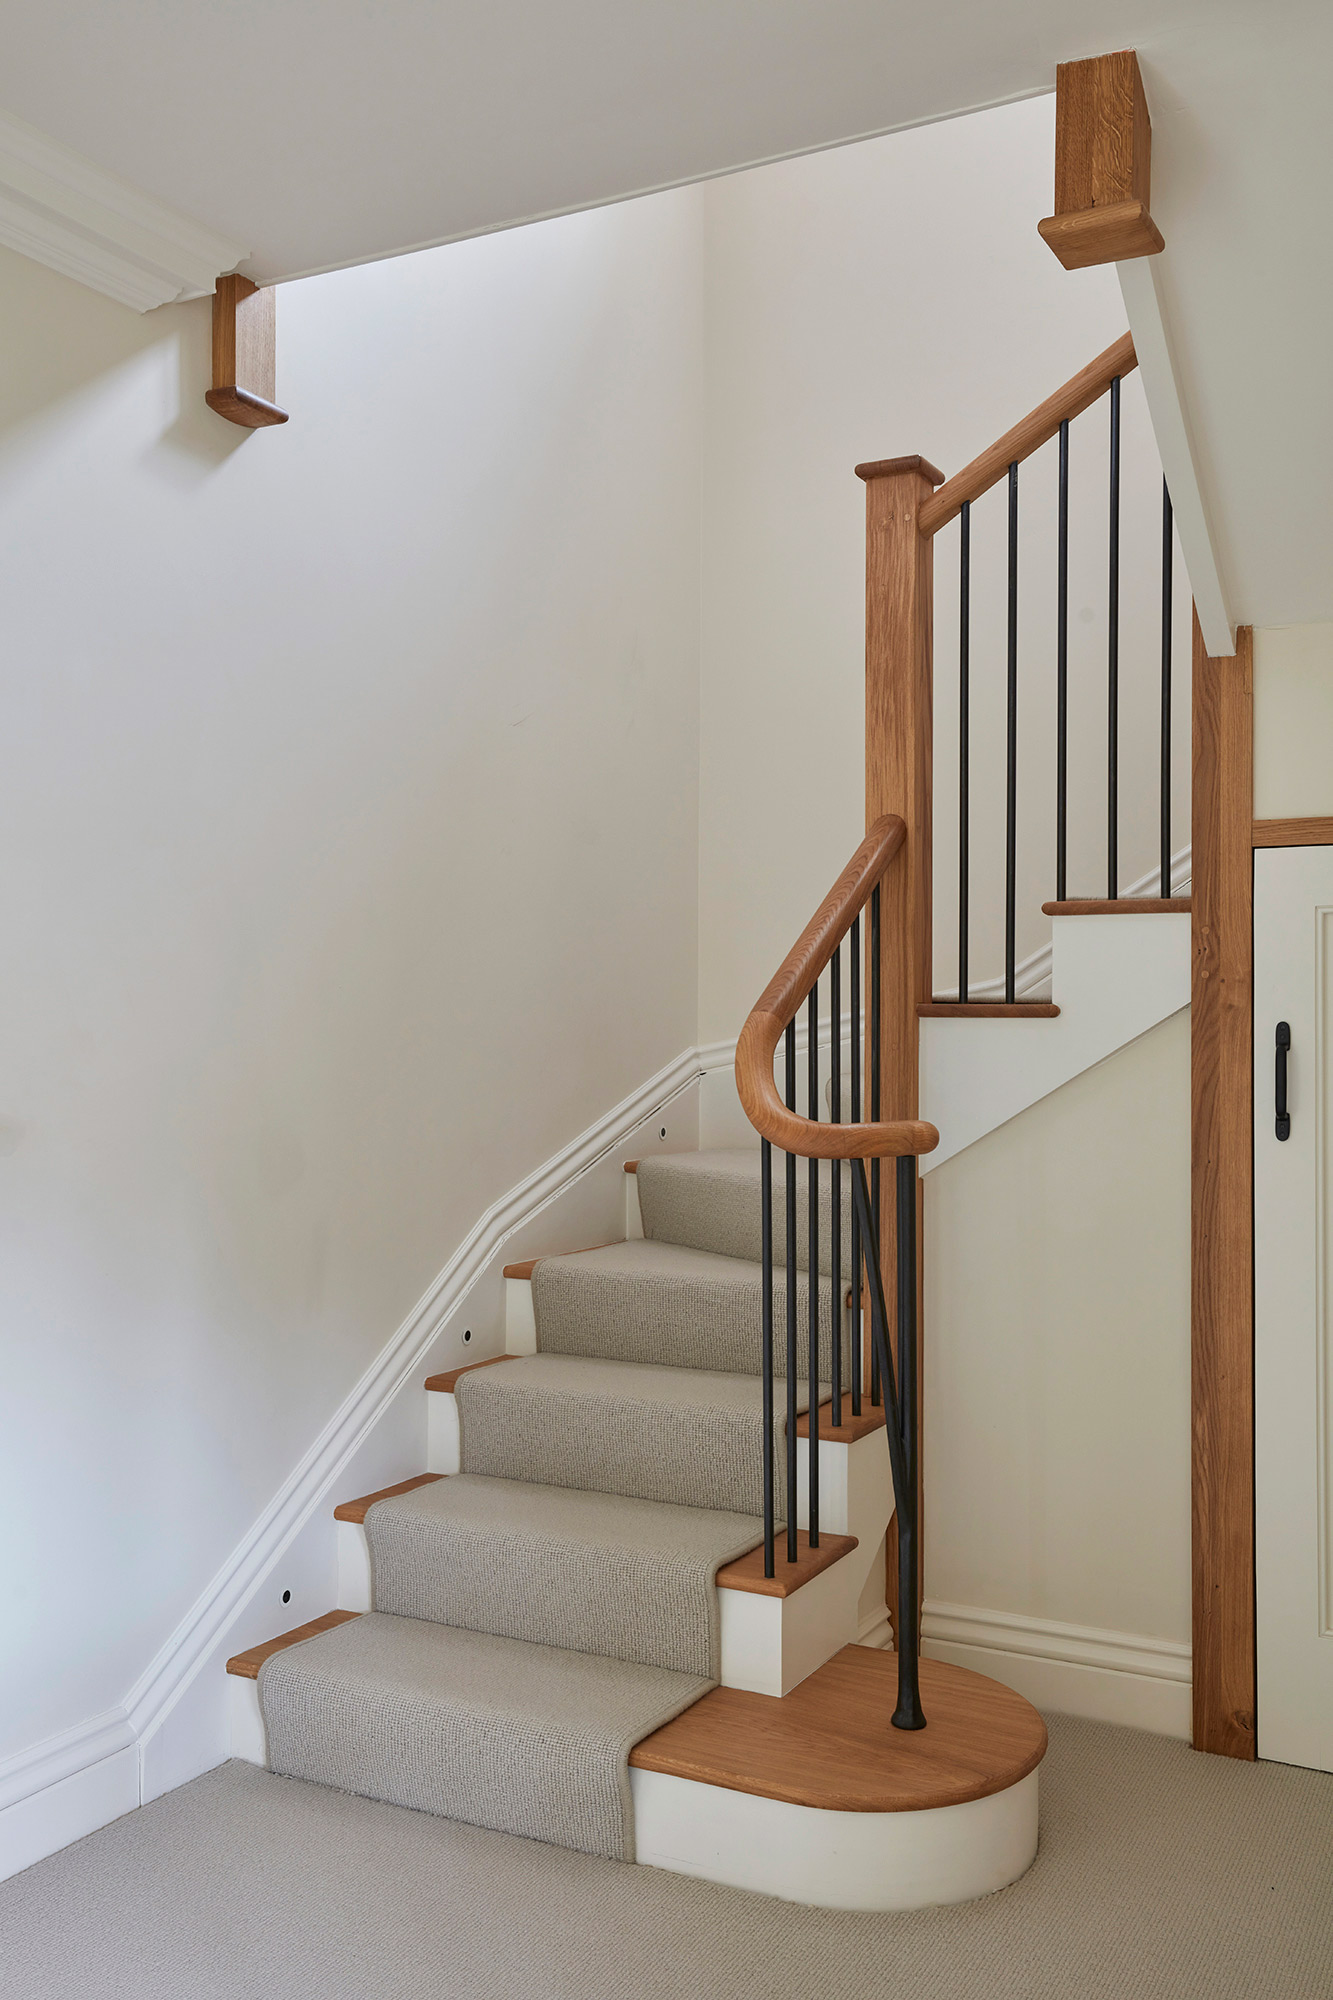 Stairs to top floor - New build by KM Grant Surrey